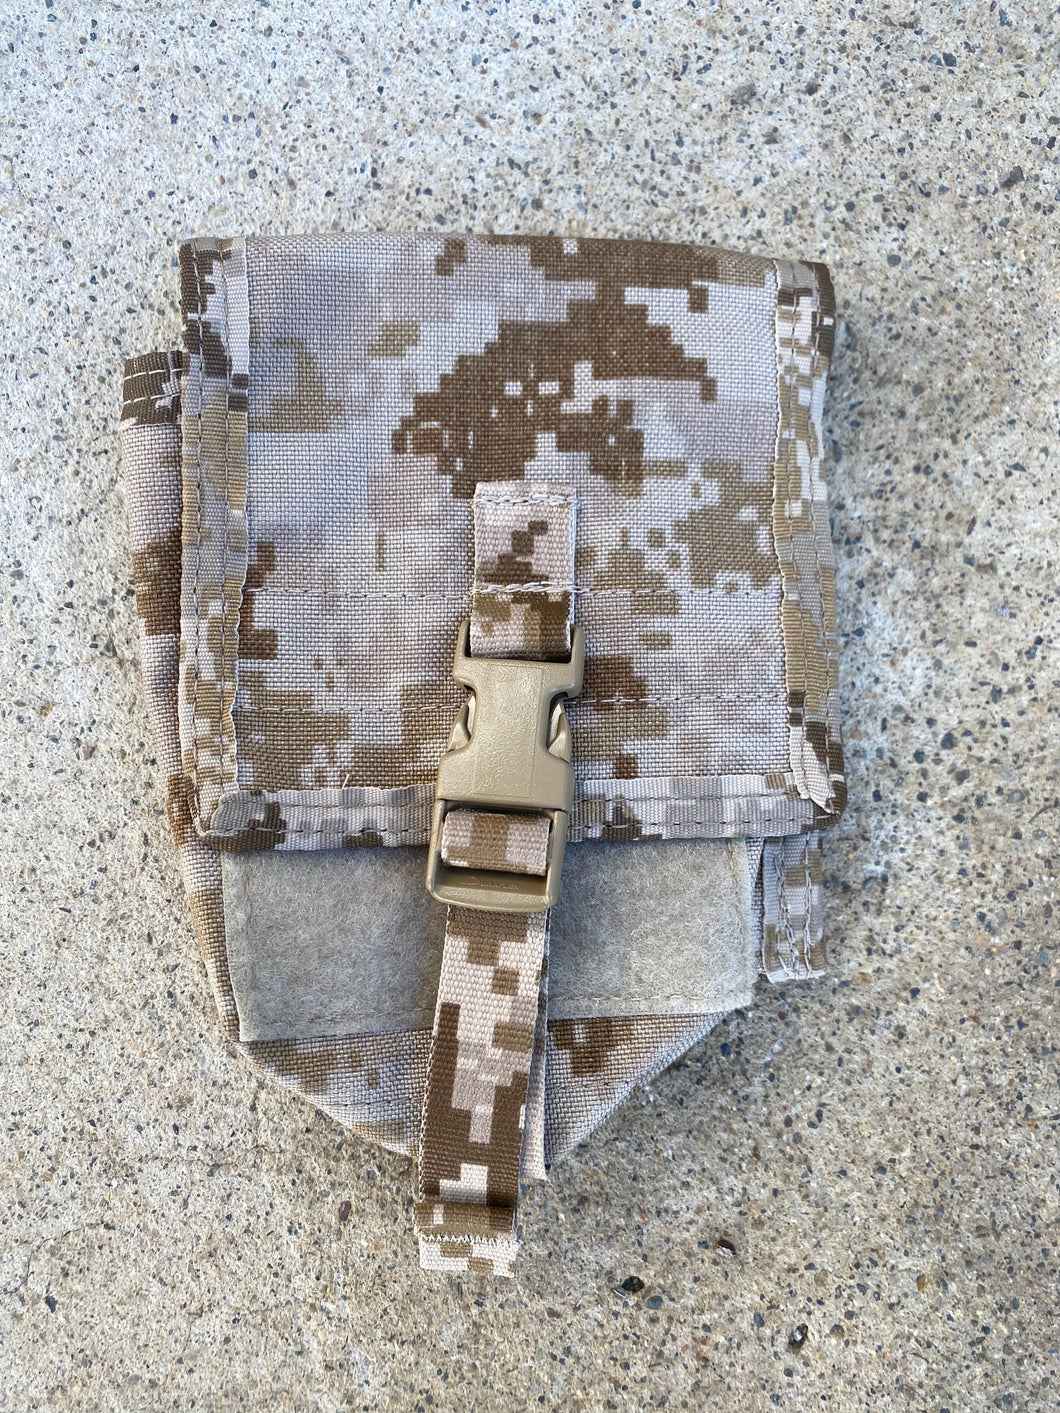 LBT-6074A NVG / Battery Utility Storage Pouch  - AOR1